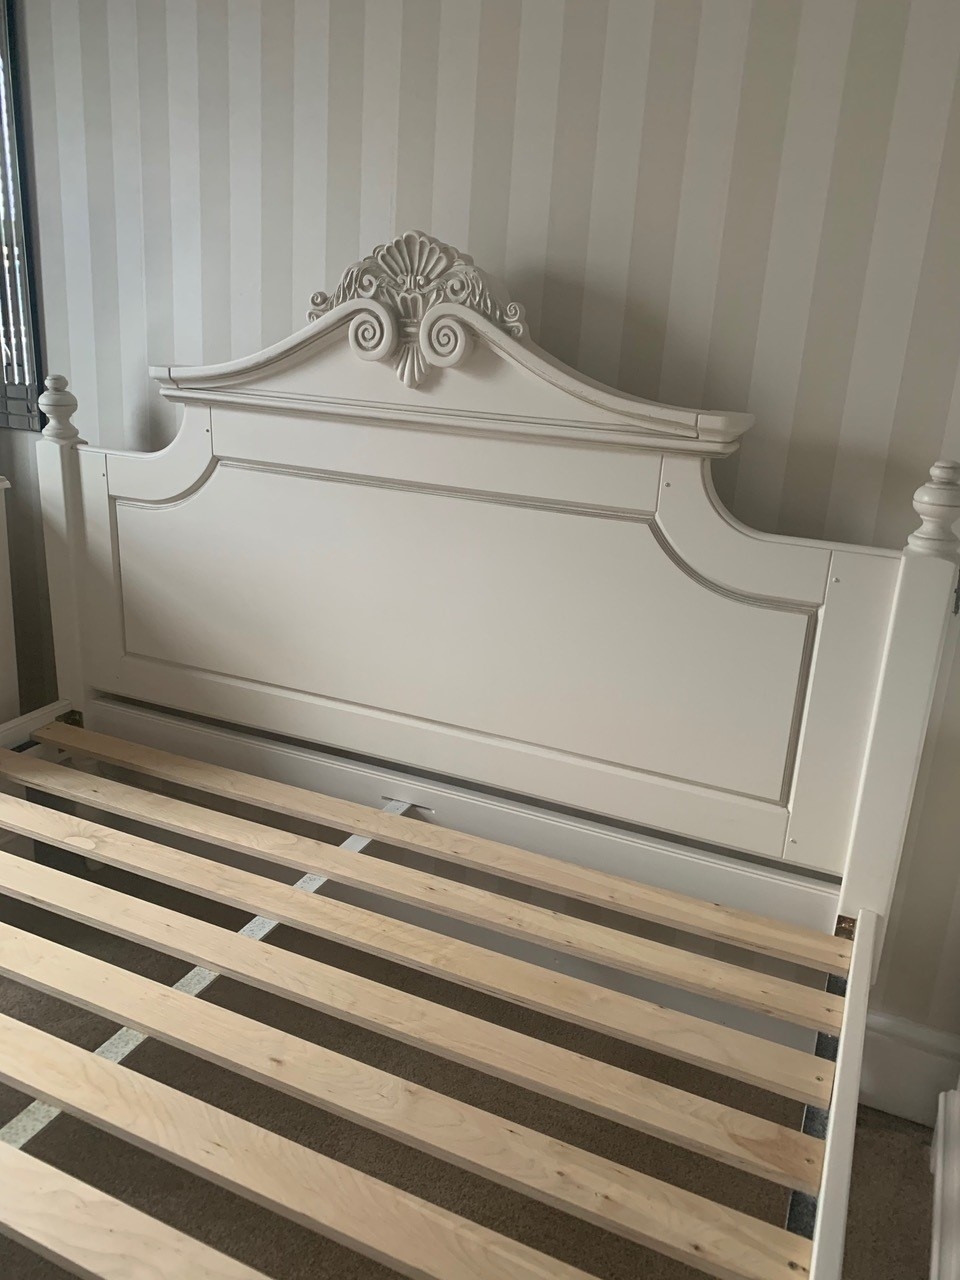 Modern King size Amore Bed: complete with head board, footboard, slats and rails - Image 3 of 4